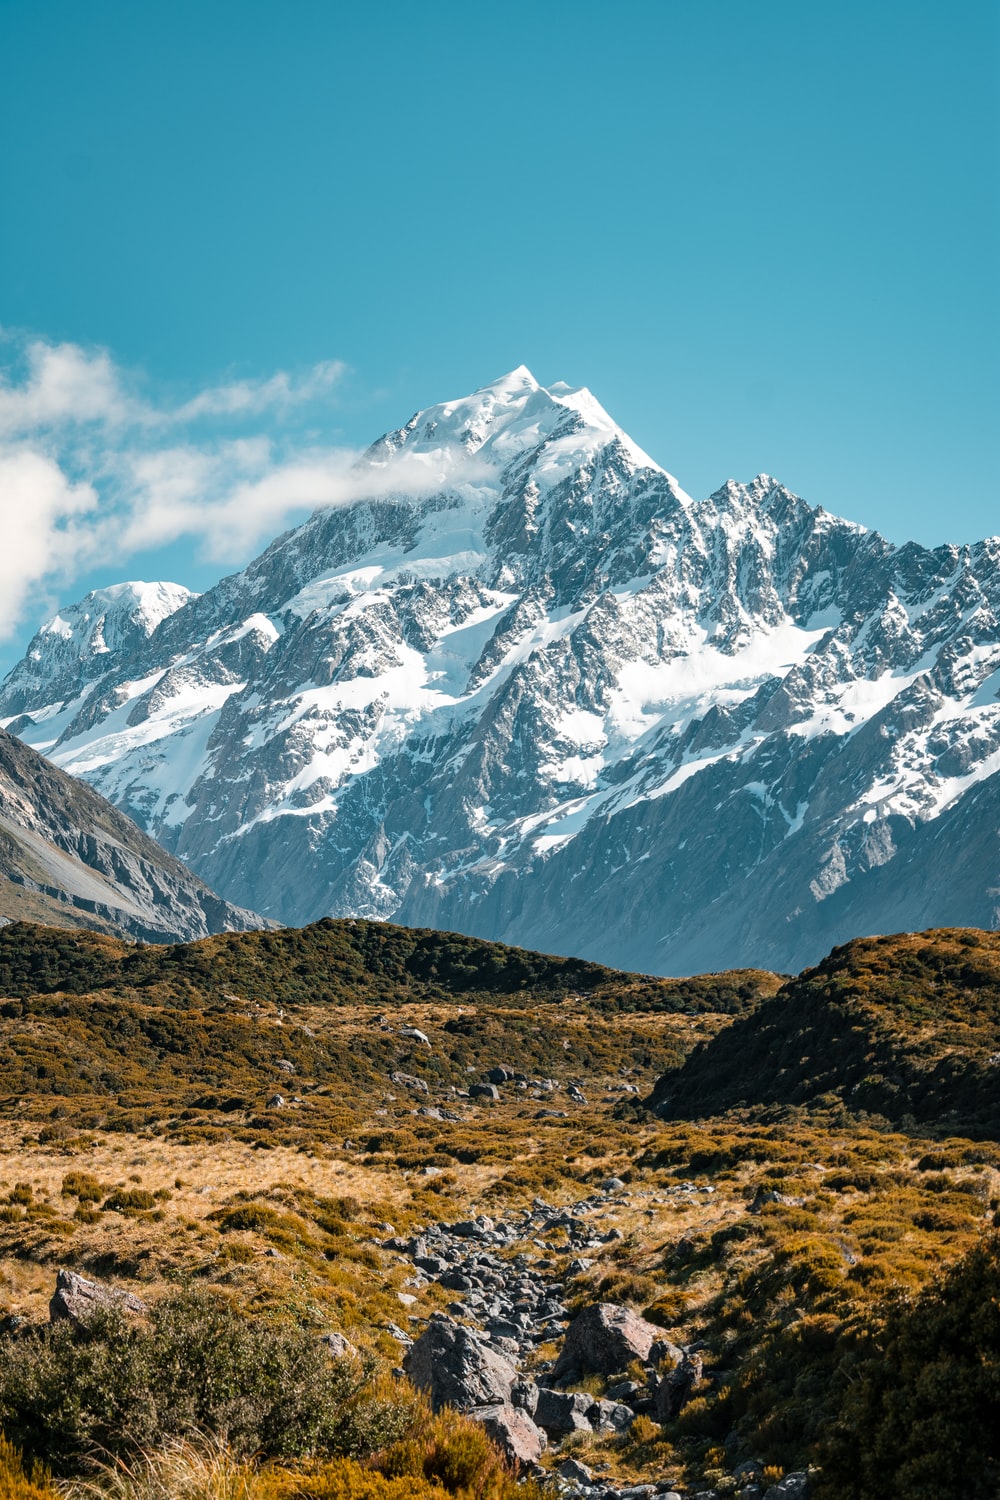 Mount Everest Picture. Download Free Image